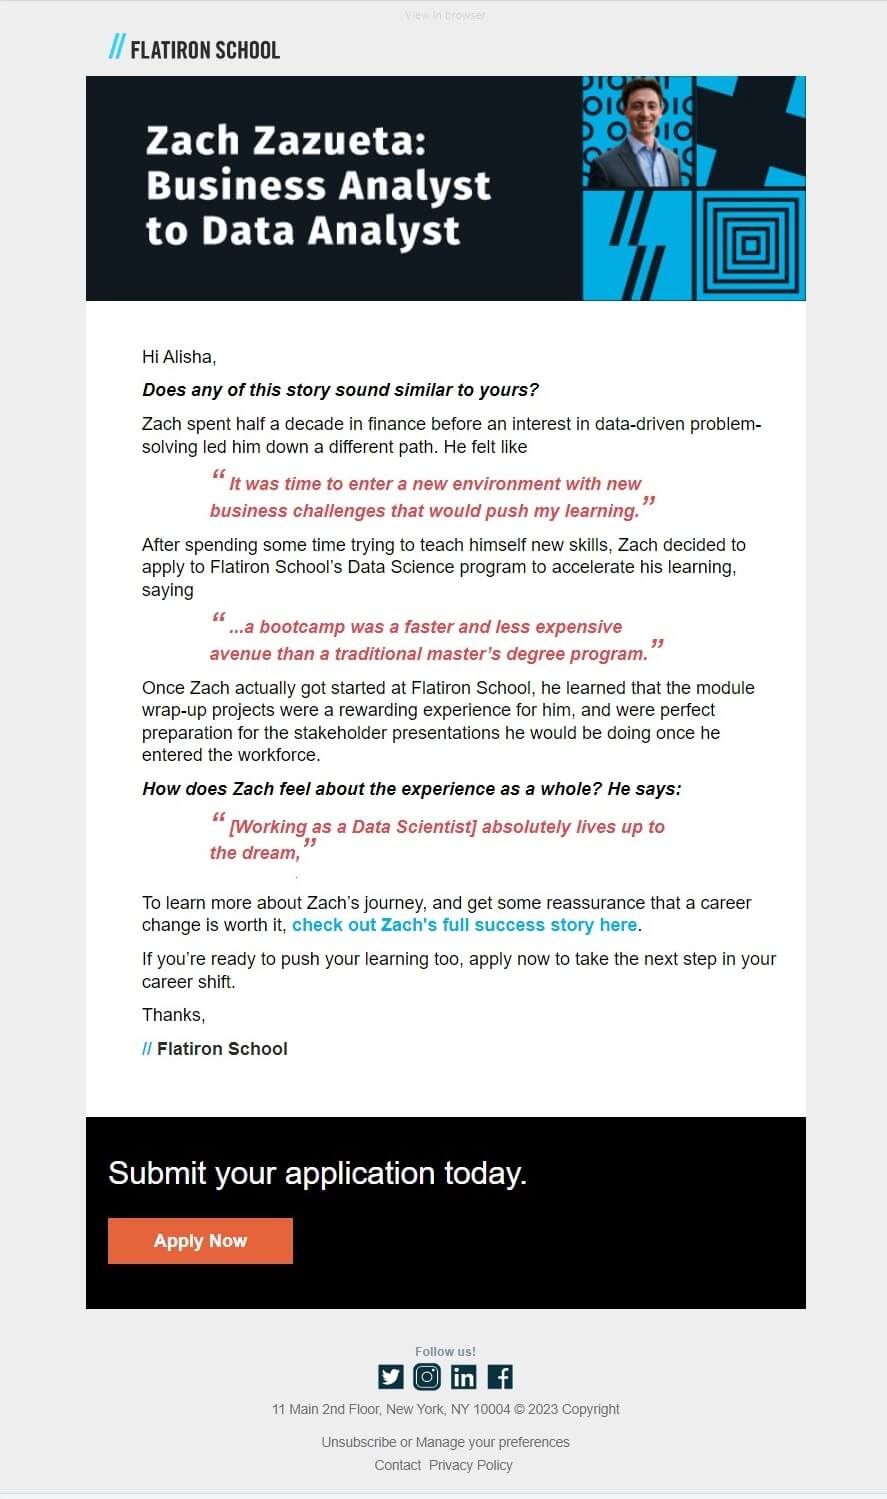 An example of a school email